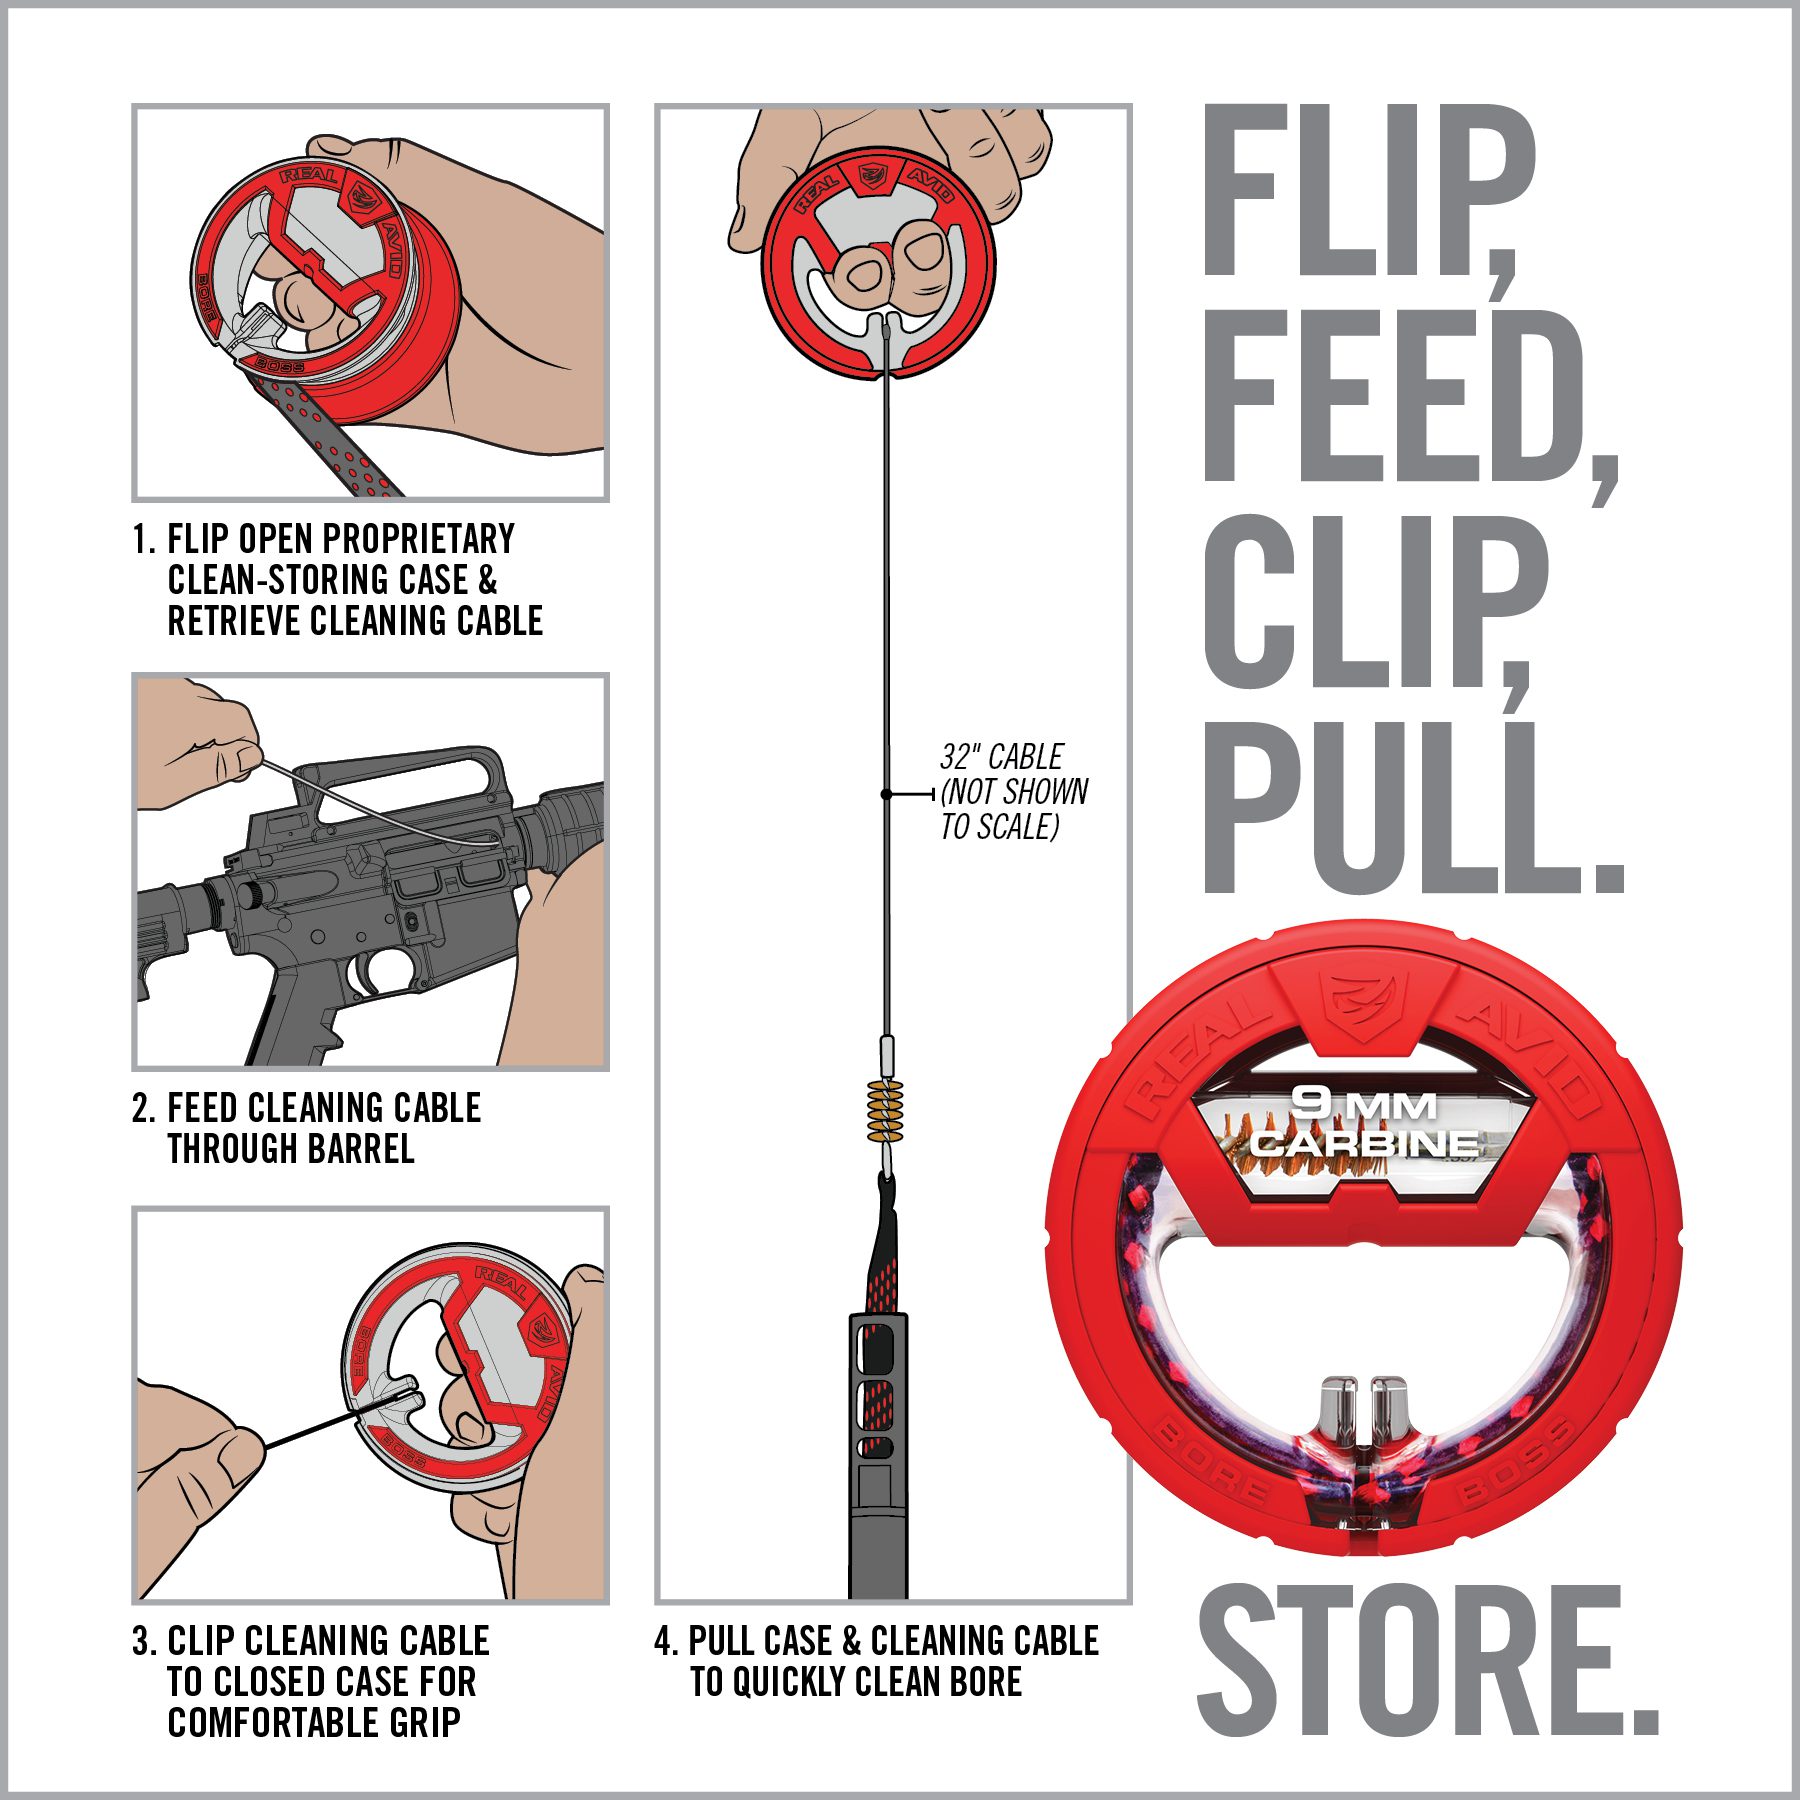 a poster with instructions on how to use a gun